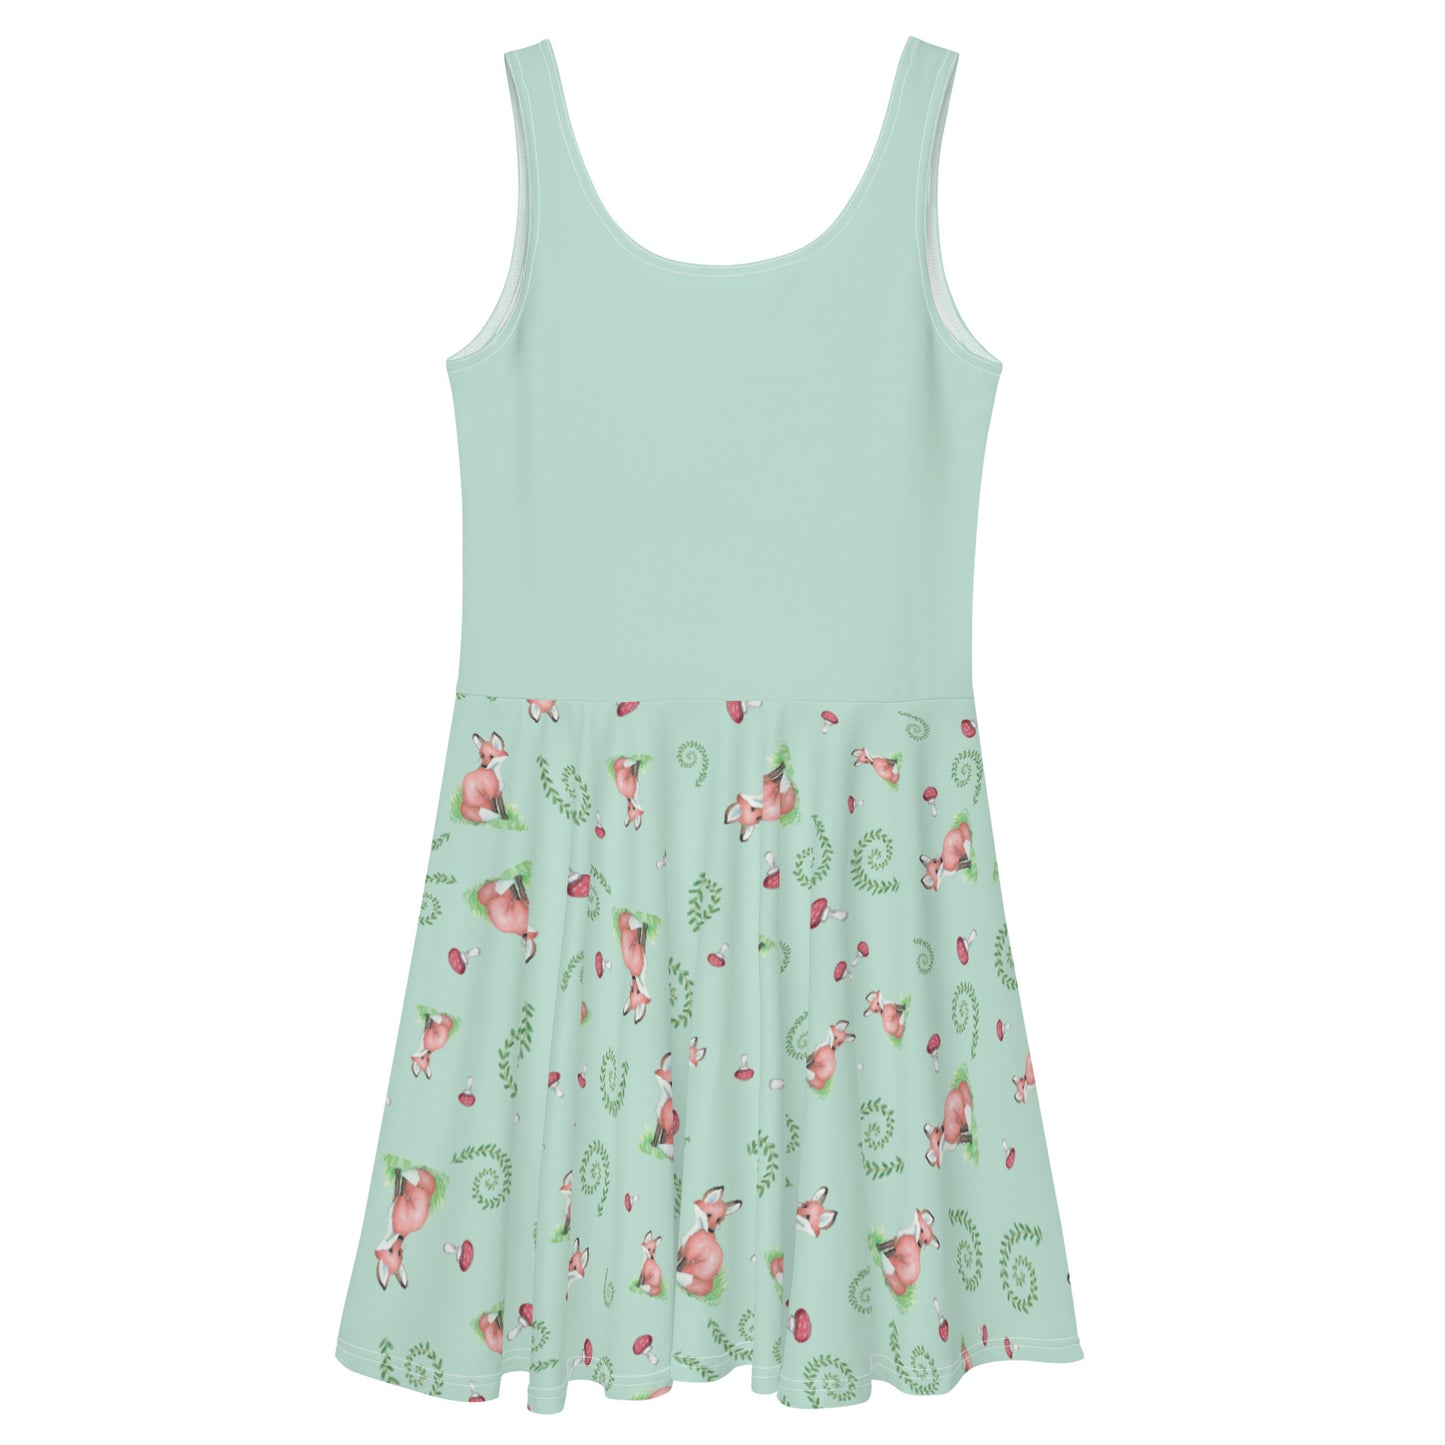 Sleeveless skater dress featuring watercolor foxes, mushrooms, and ferns on a light green fabric. Mid-thigh length flared skirt with a fitted elastic waist. Back view.